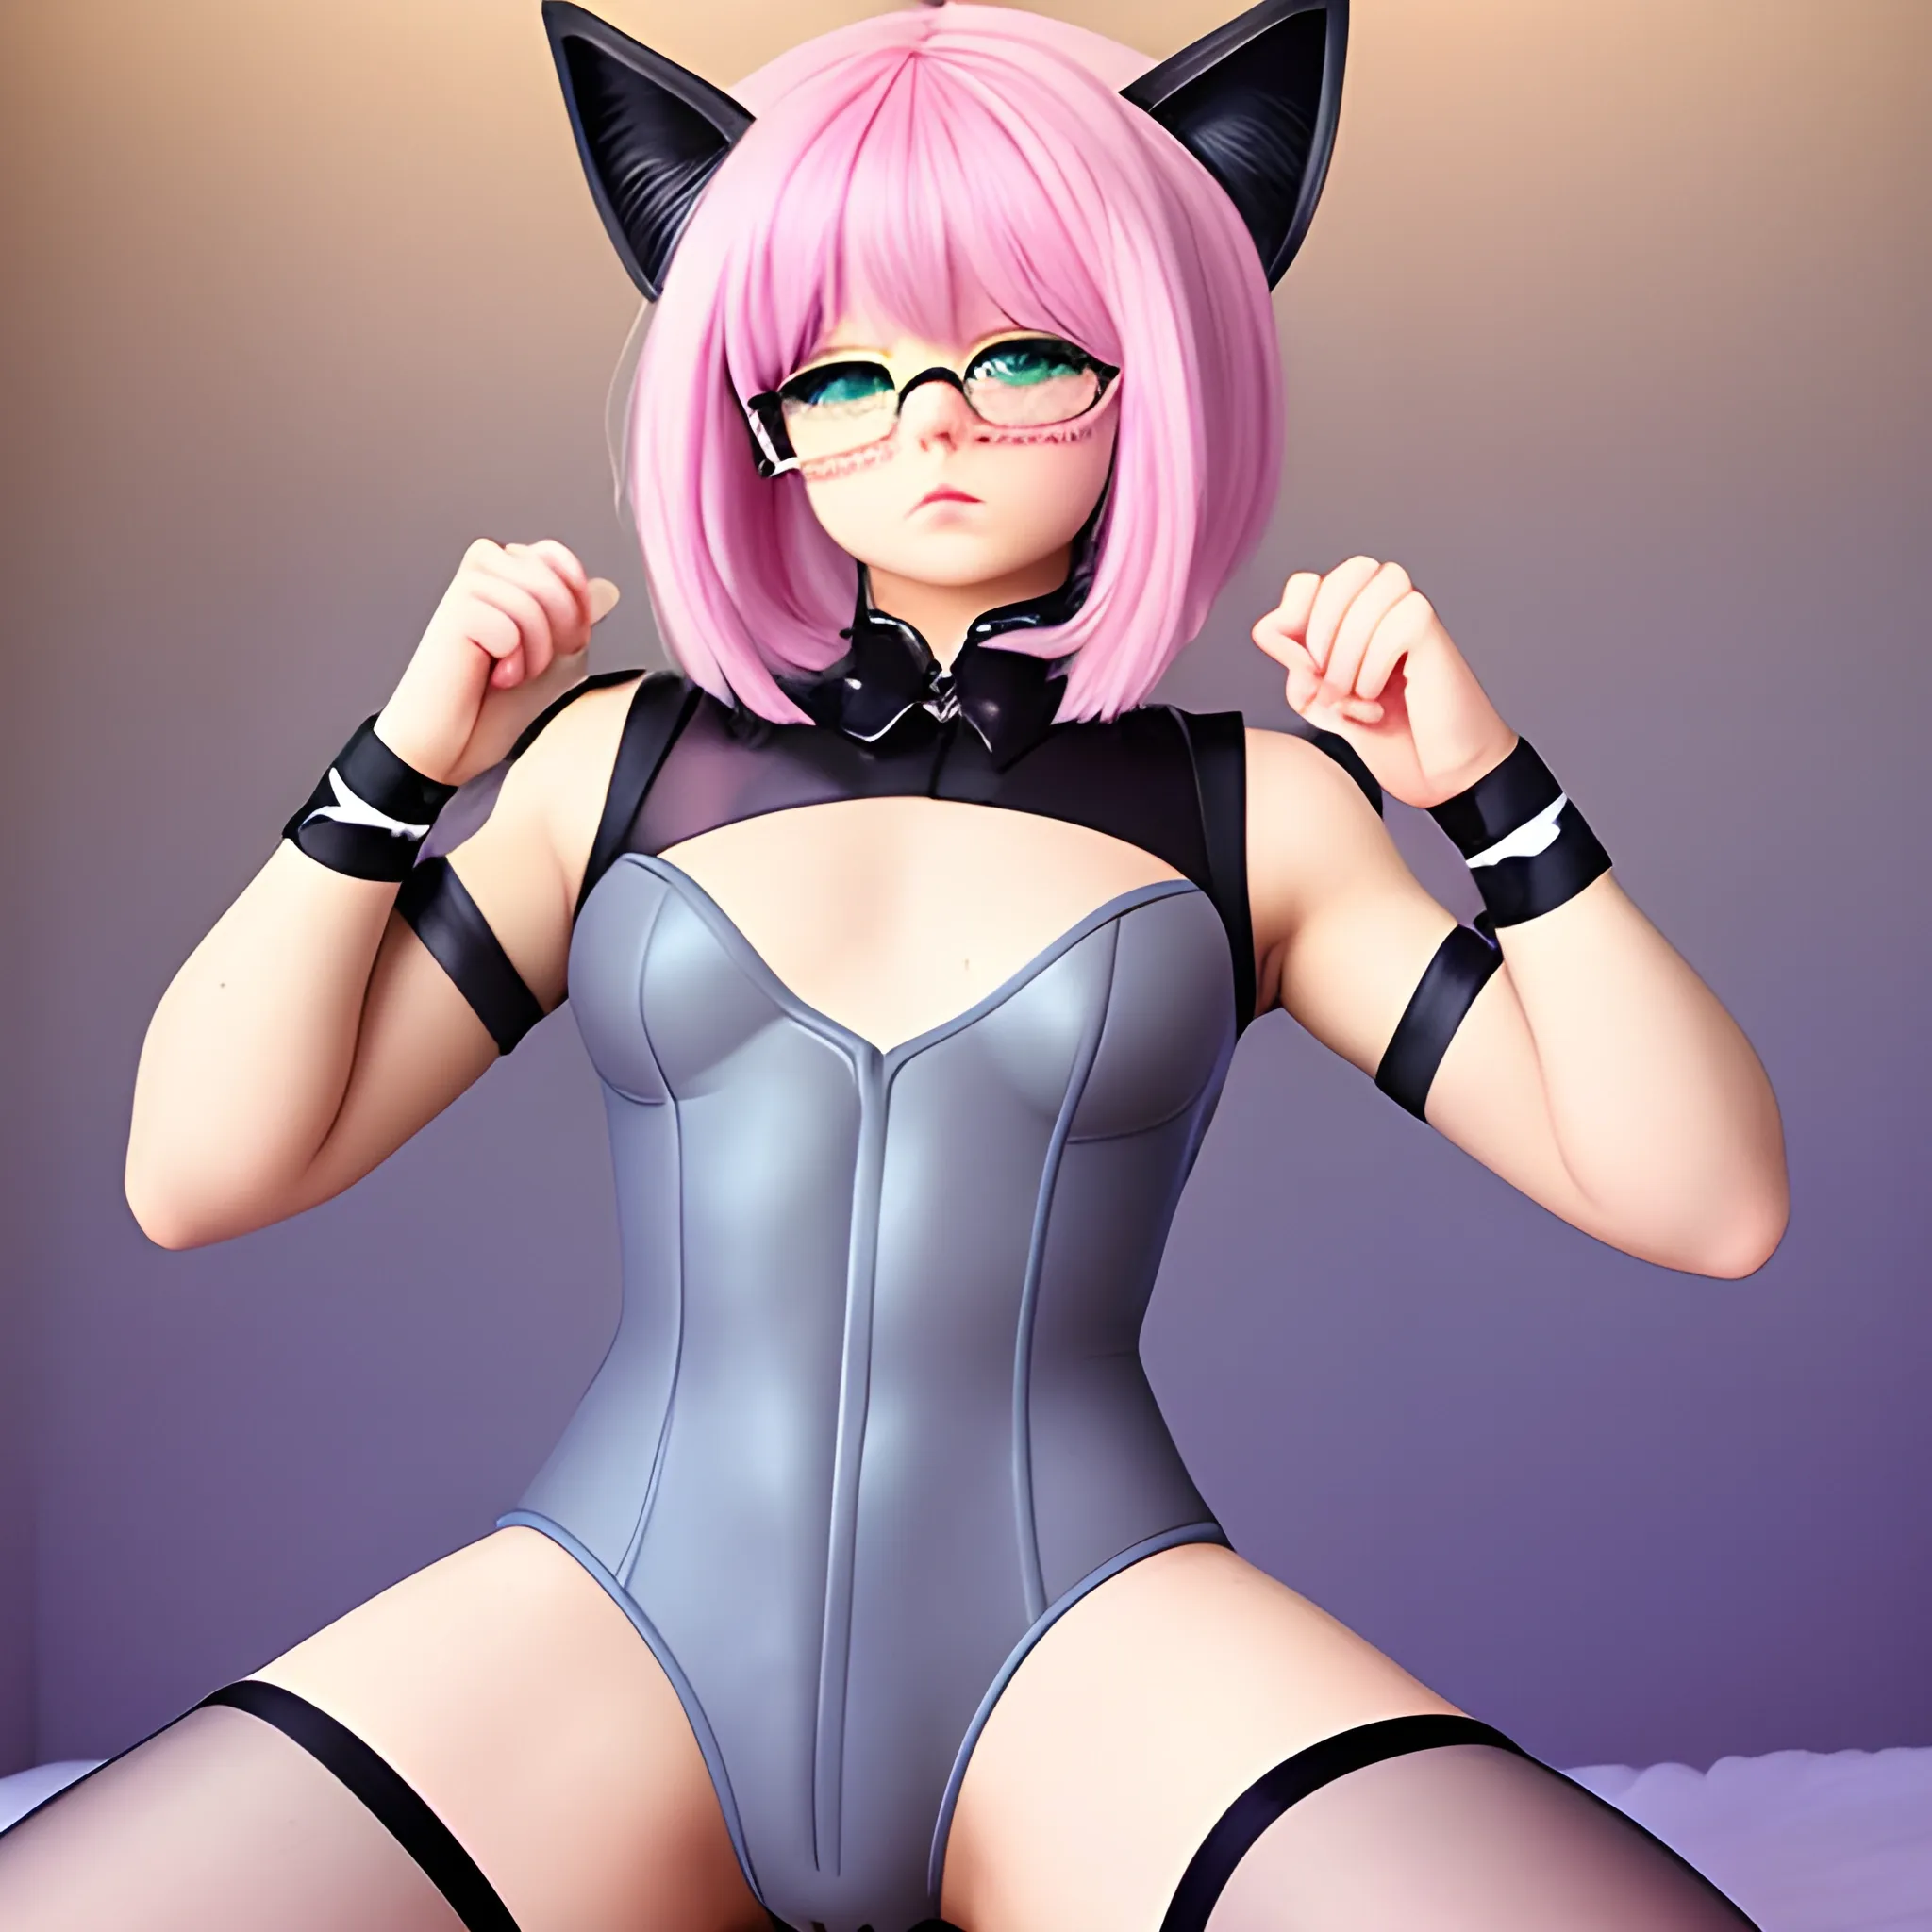 AI Art: Tomboy Femboy by @exciton